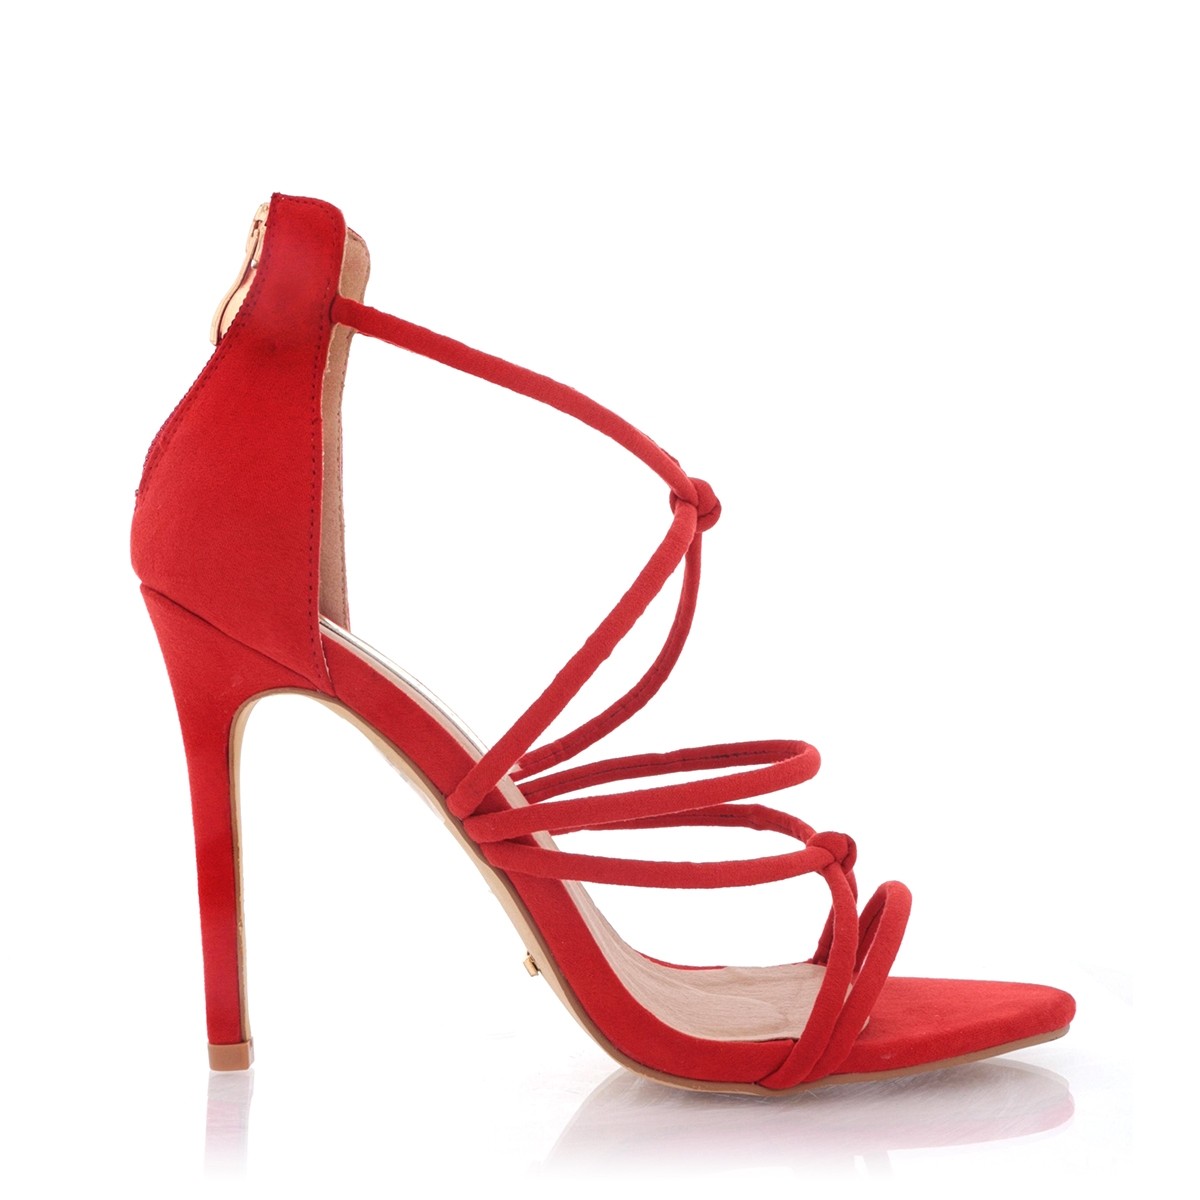 Lassi Red Suede by Billini Shoes on Sale | ShoeSales